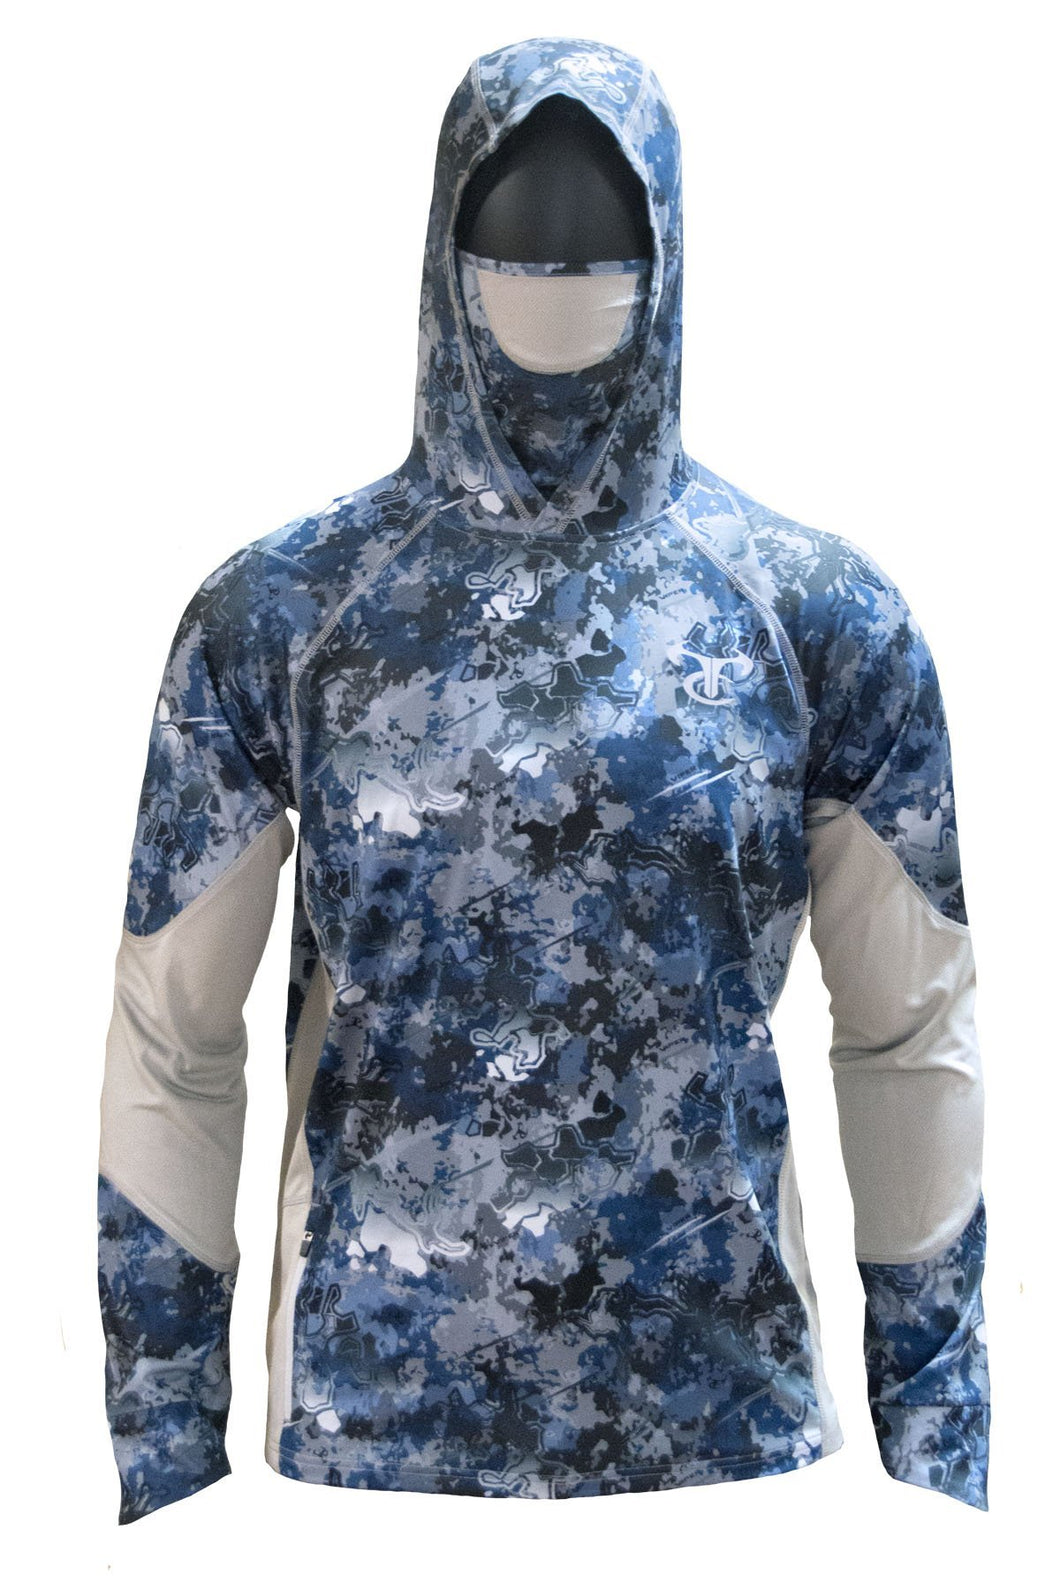 Performance Fishing Hoodie with Built in Insect Repellent